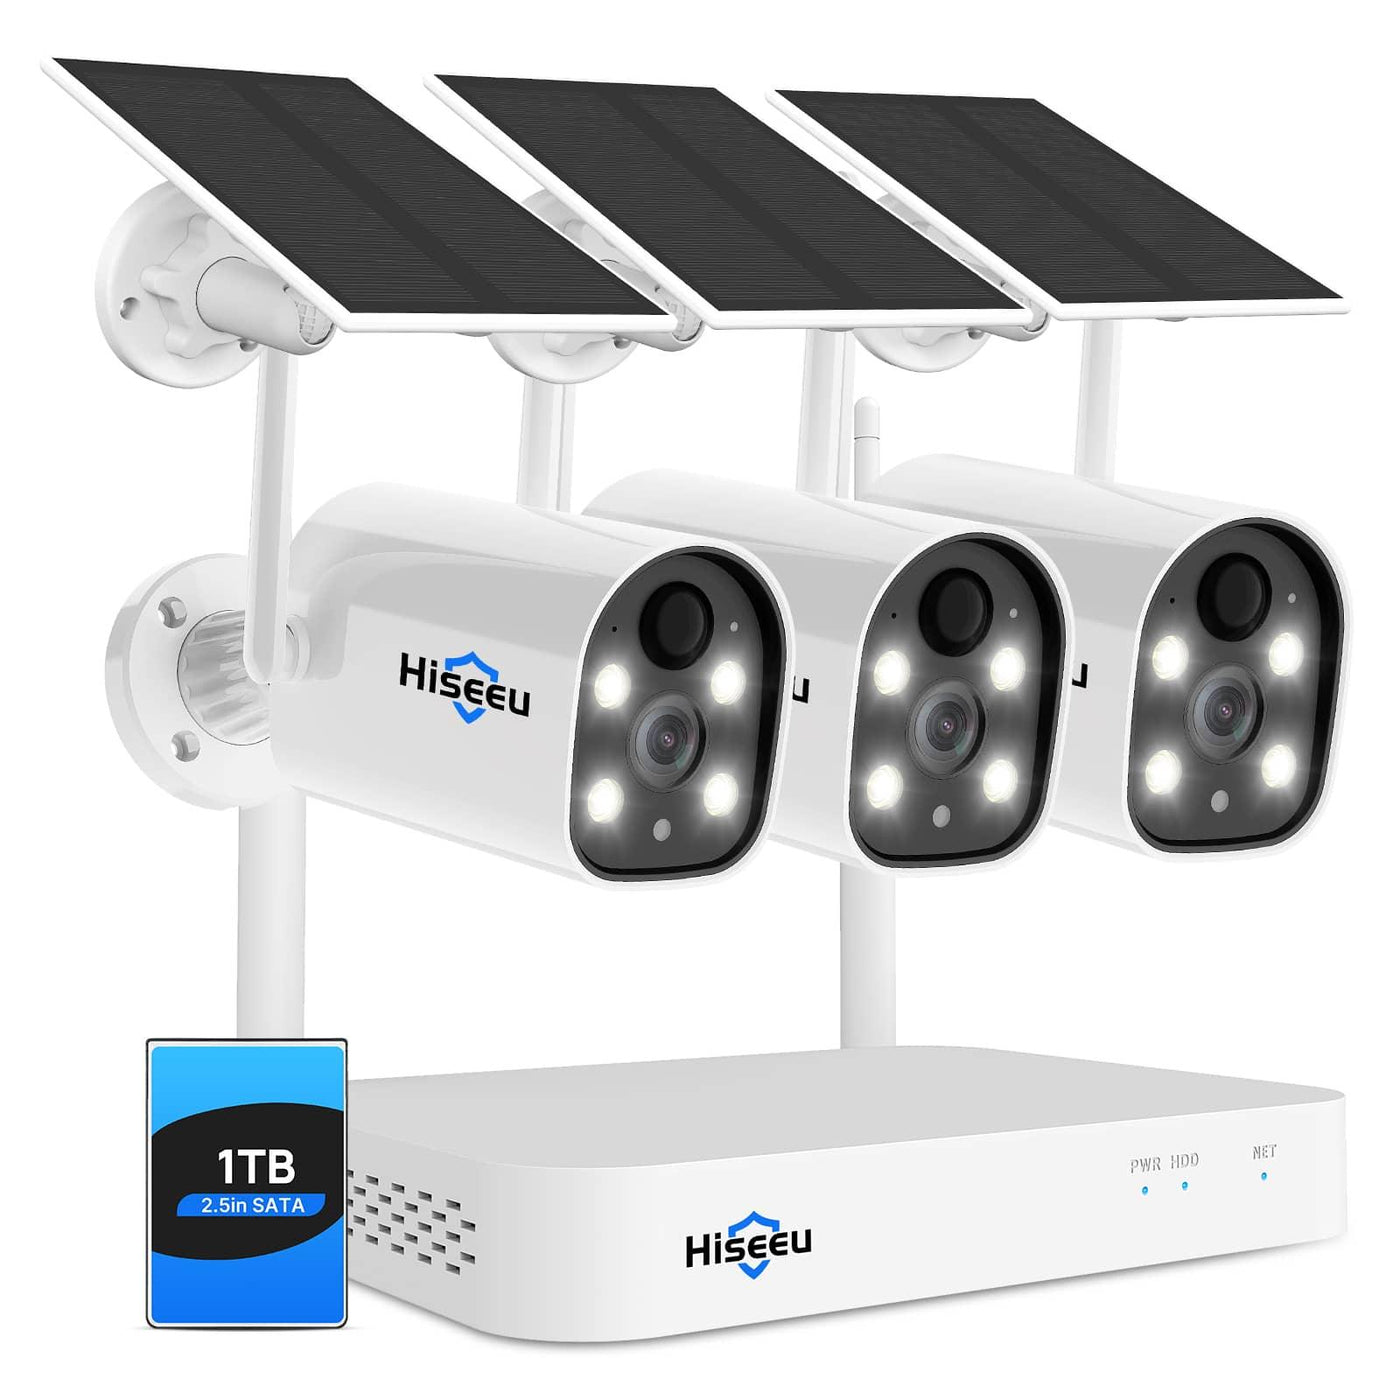 Hiseeu [Expandable 10CH,3MP] NVR Wireless Security Camera System Outdoor Indoor, AI Human Detection, 2-Way Audio, 3MP Solar Powered Cameras with Color Night Vision, IP66 Waterproof, 1TB Hard Drive preinstalled - Hiseeu